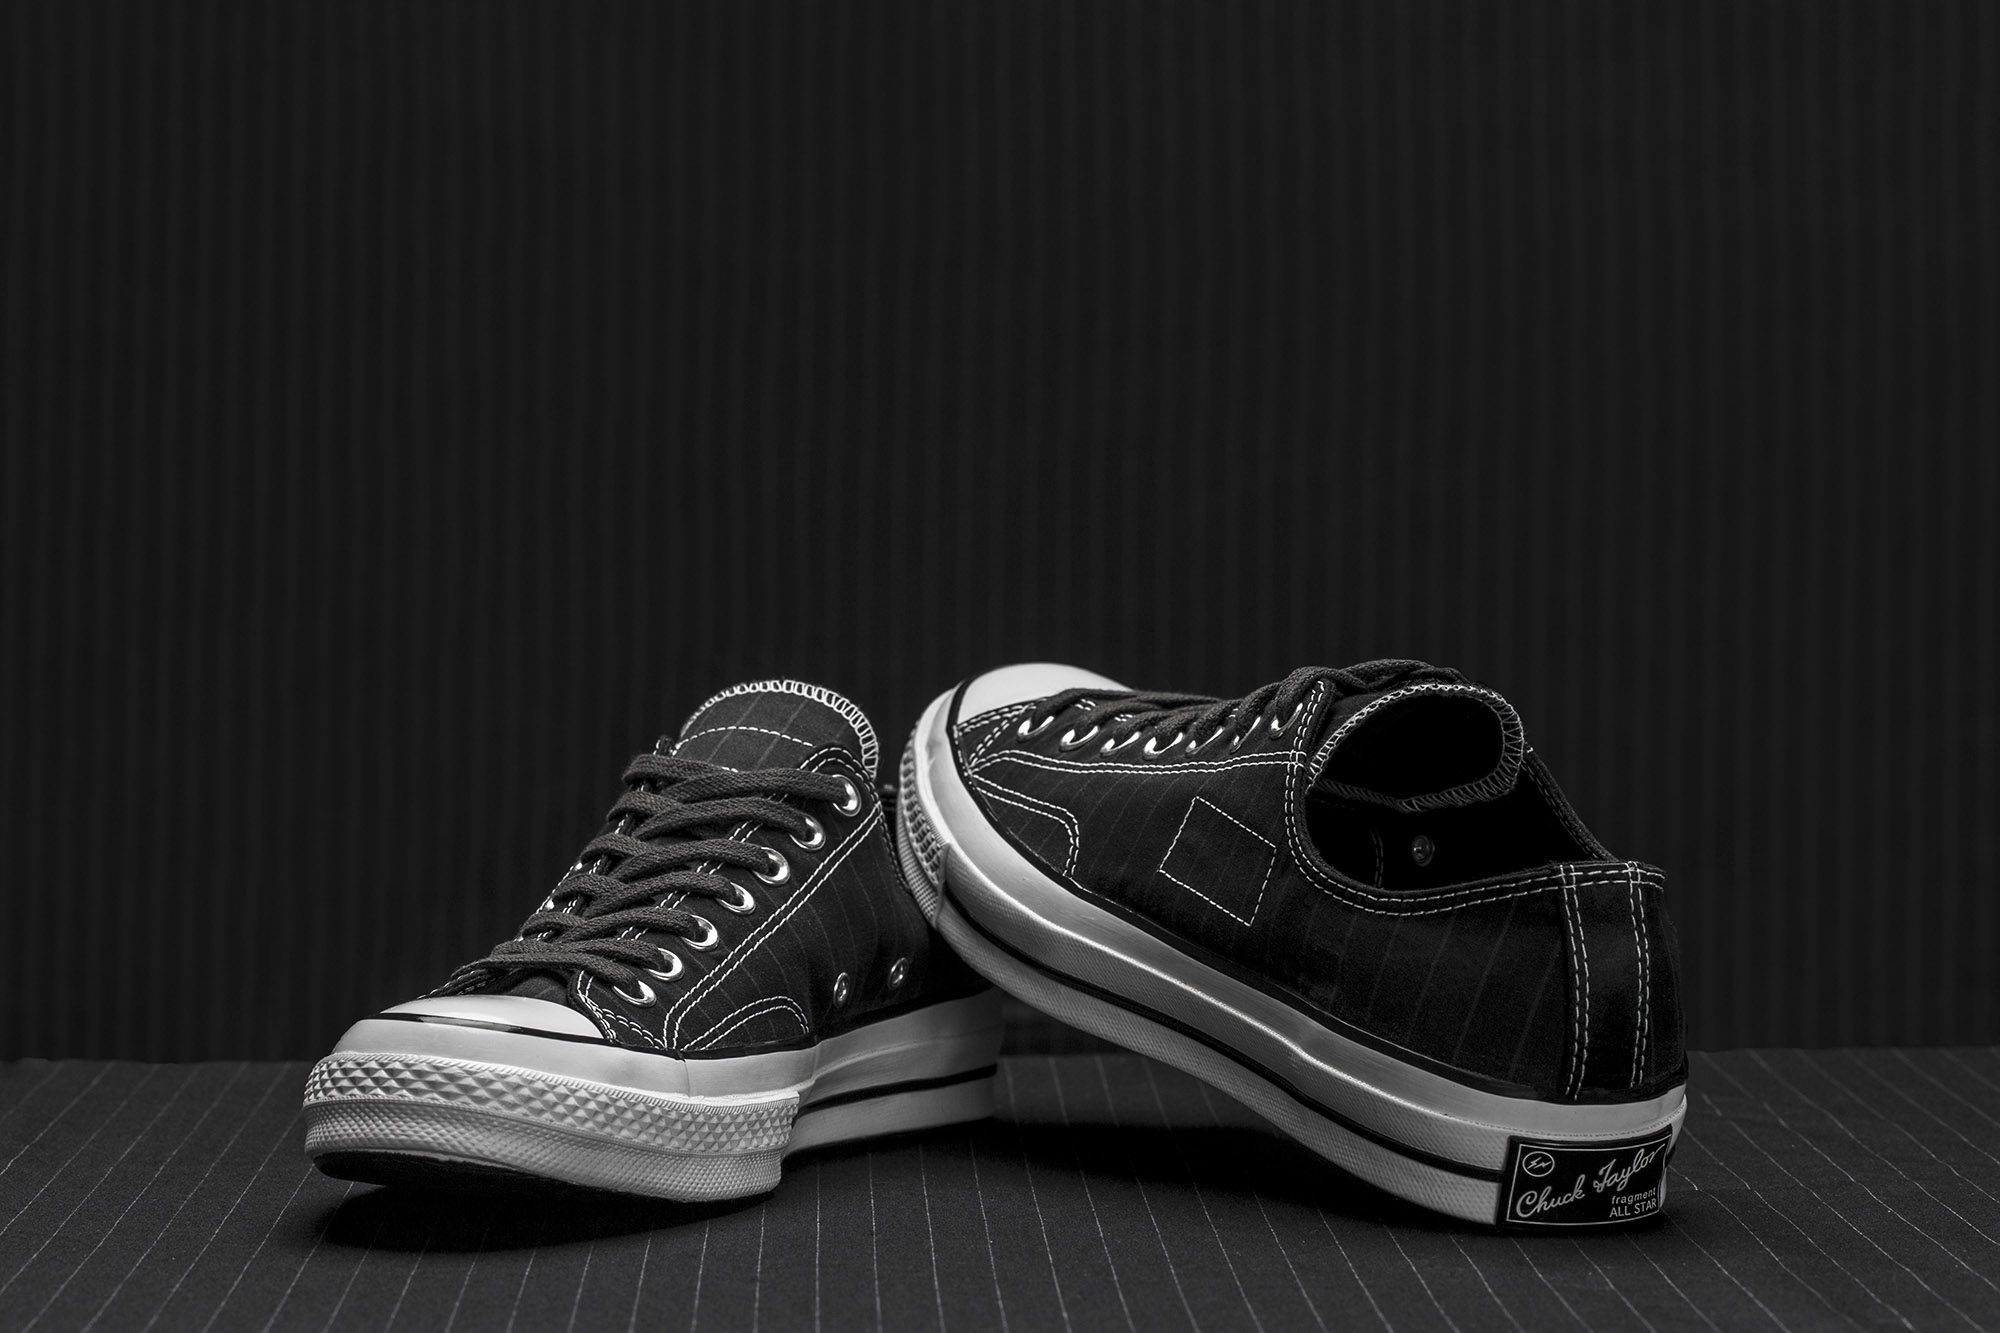 converse taylor all star 70